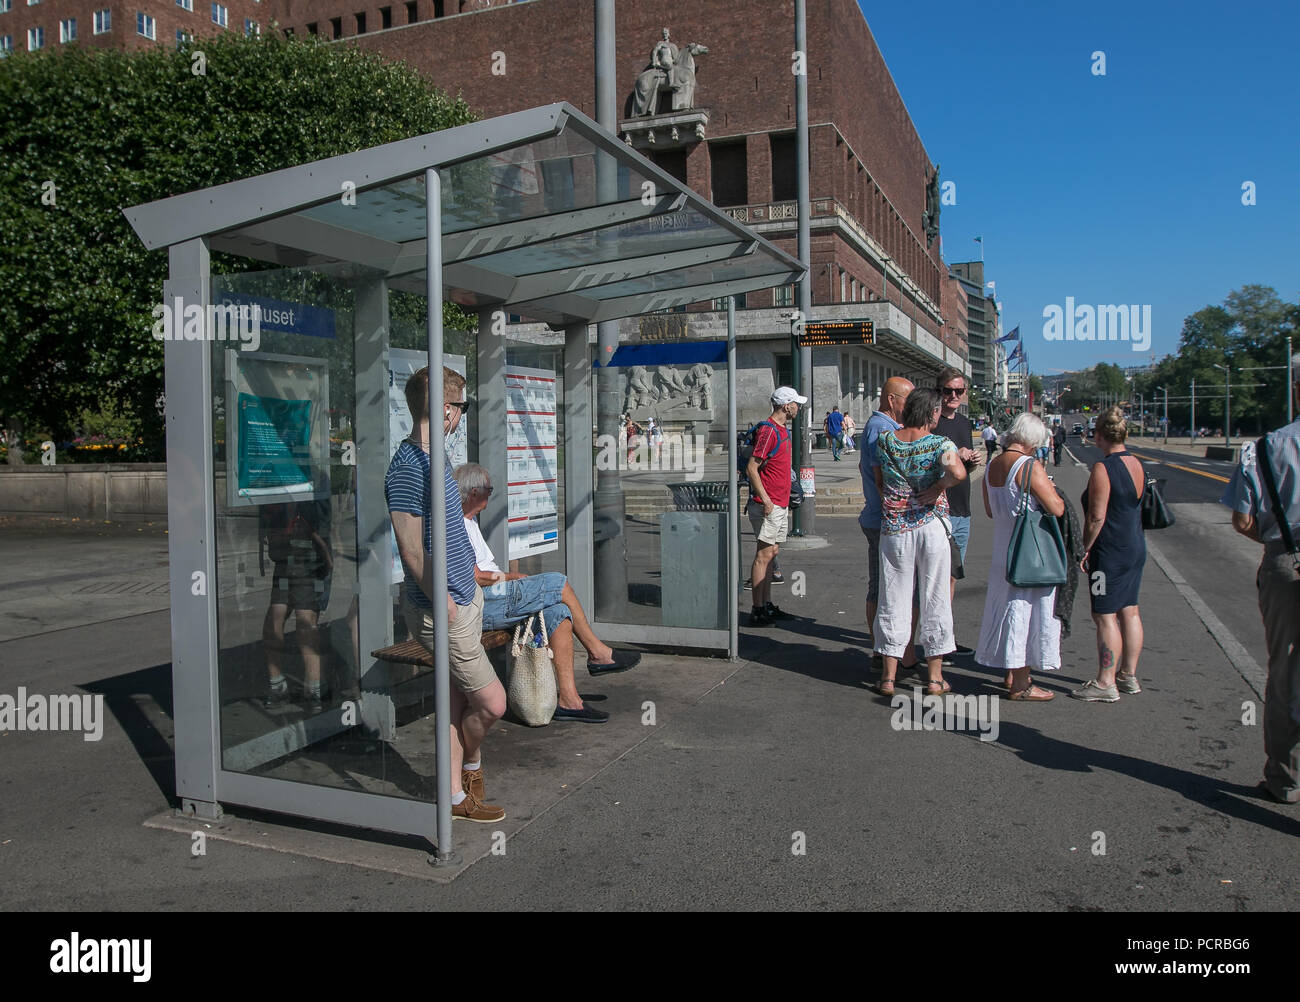 Oslo, Norway, July 21, 2018: People are waiting for a bus at a bus stop near City Hall. Stock Photo